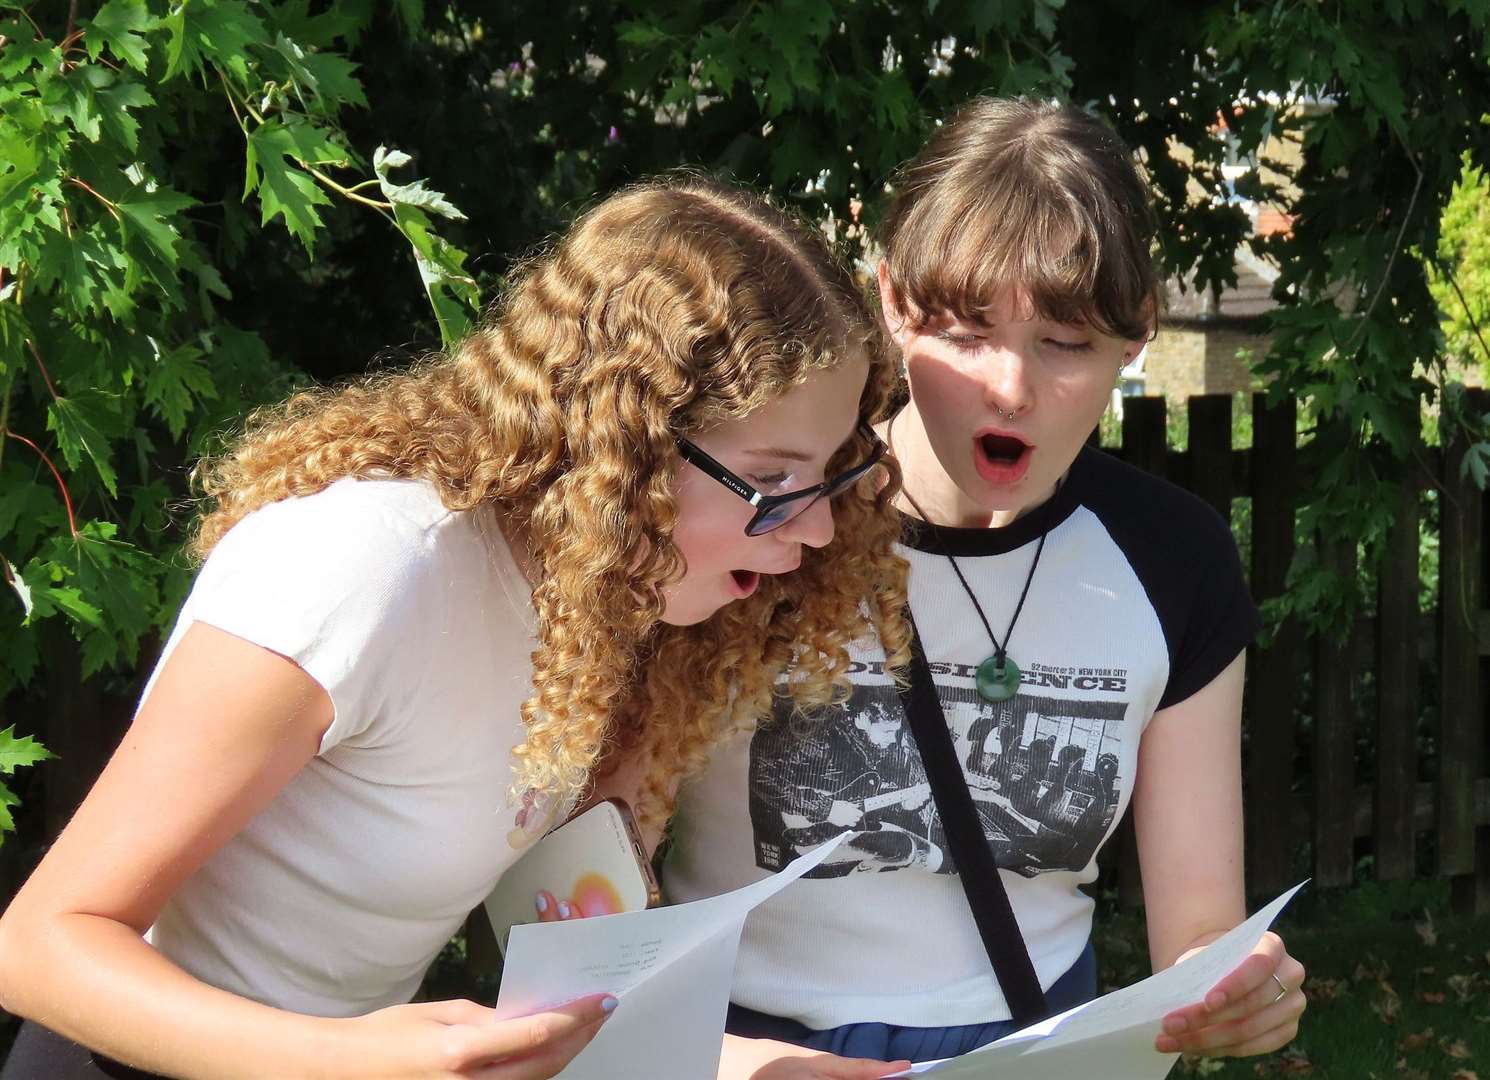 Dover Grammar School for Girls pupils Lillianna Chapman and Stephanie Macari react to their exam results